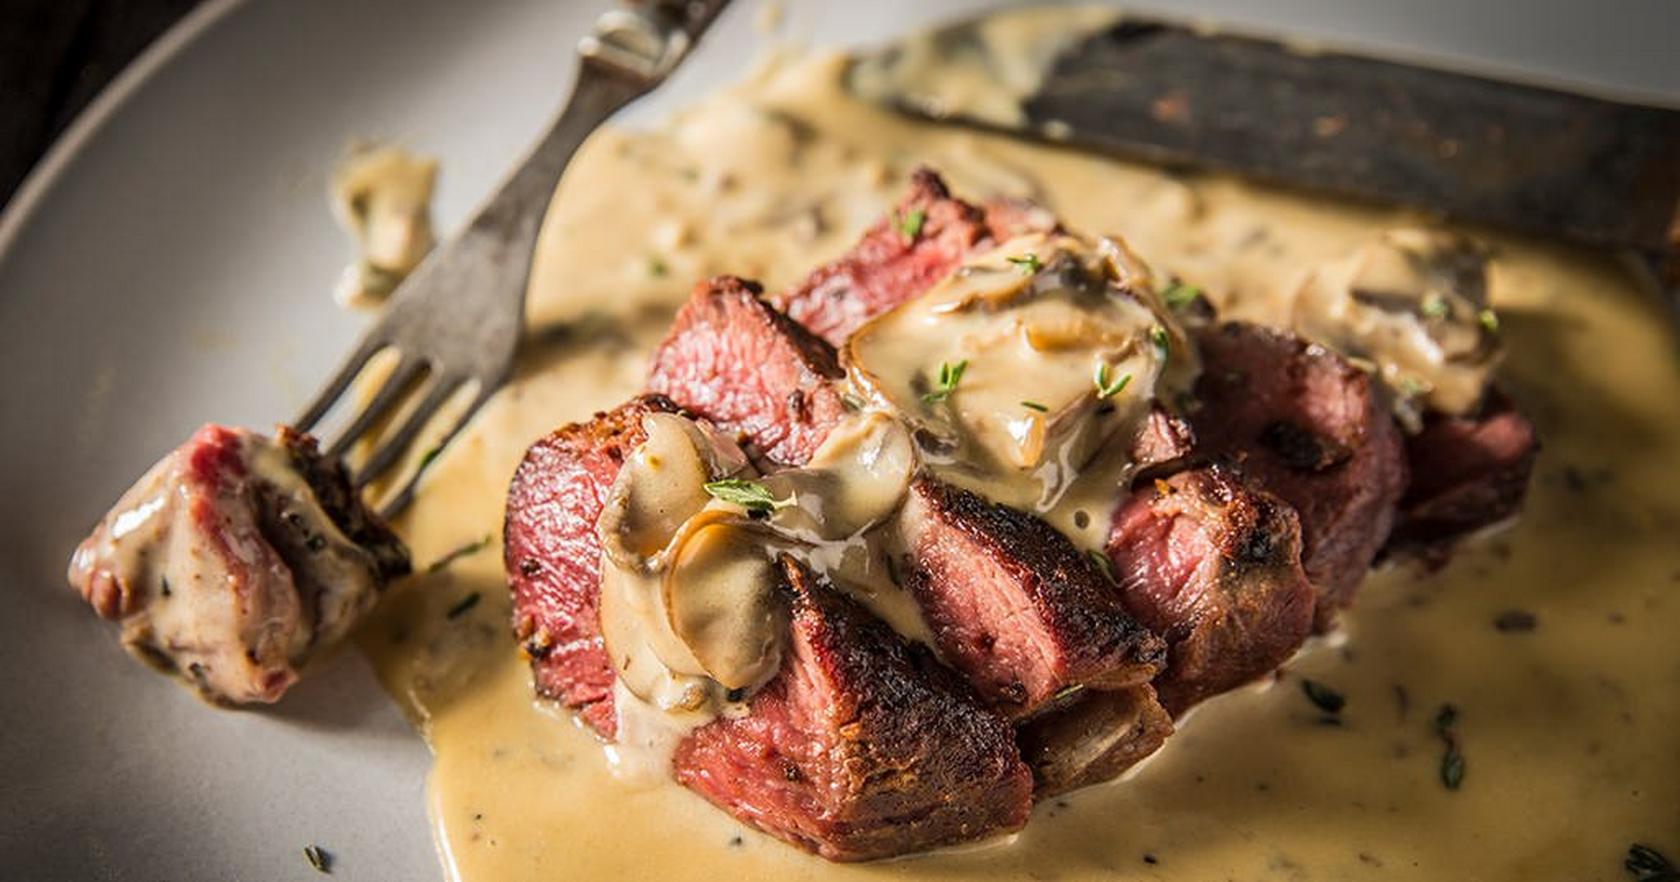 image of Grilled Peppercorn Steaks with Mushroom Cream Sauce